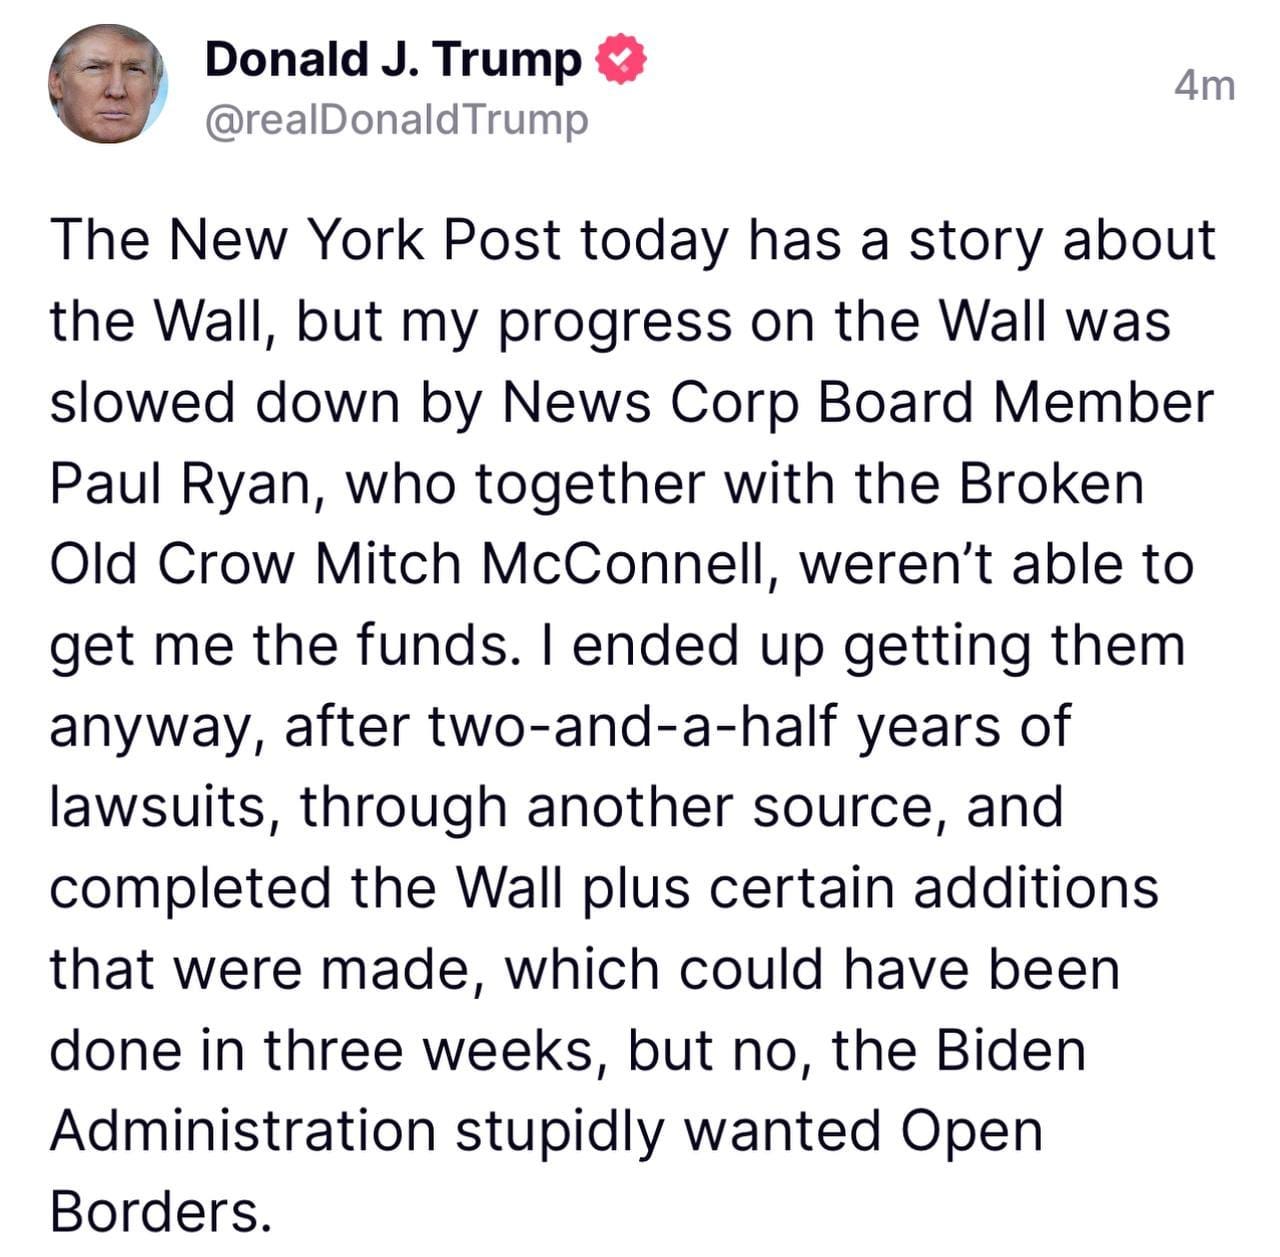 May be a Twitter screenshot of 1 person and text that says 'Donald J. Trump @realDonaldTrump 4m The New York Post today has a story about the Wall, but my progress on the Wall was slowed down by News Corp Board Member Paul Ryan, who together with the Broken Old Crow Mitch McConnell, weren't able to get me the funds. ended up getting them anyway, after two-and-a-half years of lawsuits, through another source, and completed the Wall plus certain additions that were made, which could have been done in three weeks, but no, the Biden Administration stupidly wanted Open Borders.'